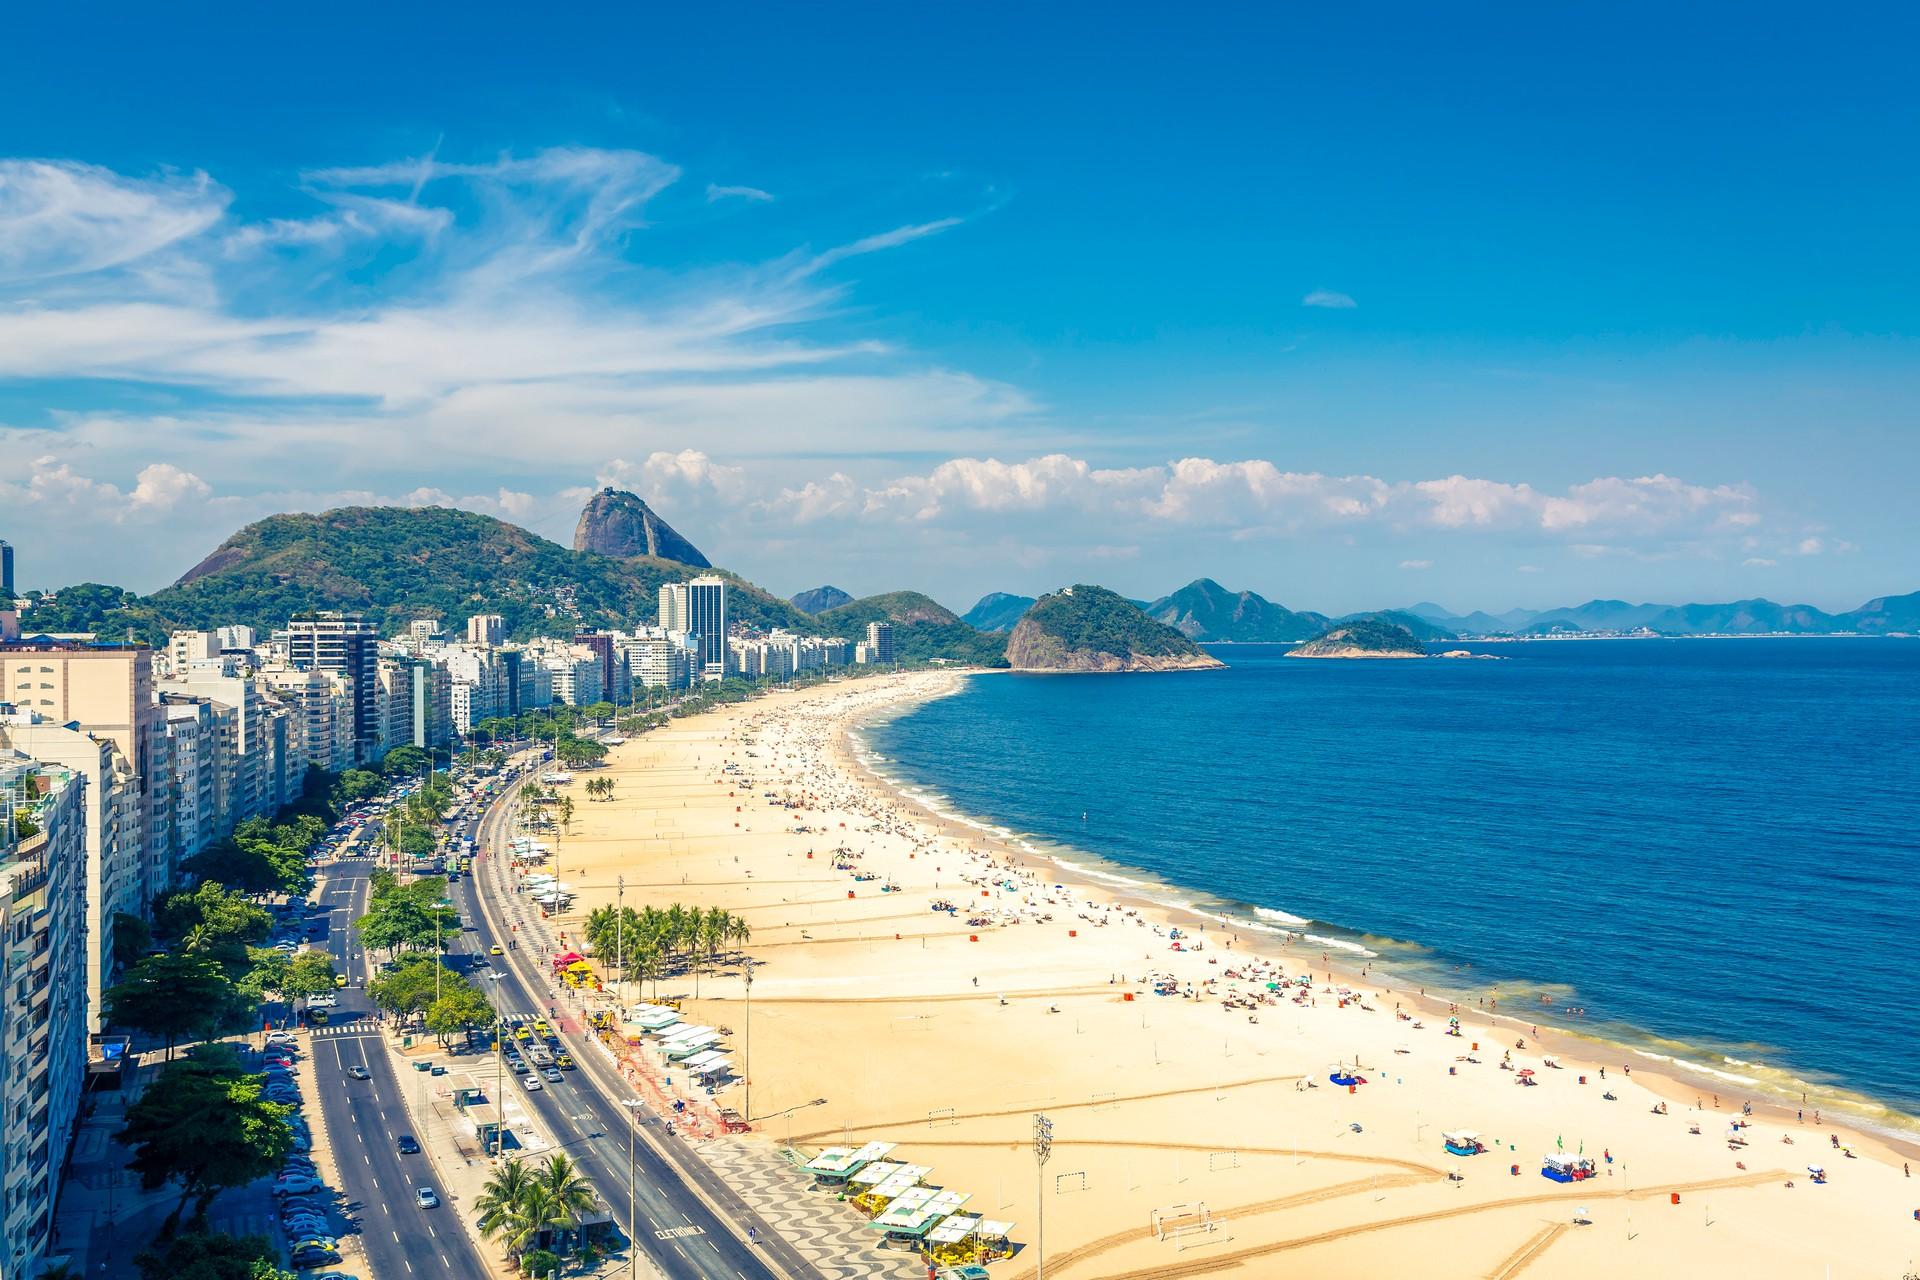 Aerial view of people on the beach in Rio de Janeiro in partly cloudy weather